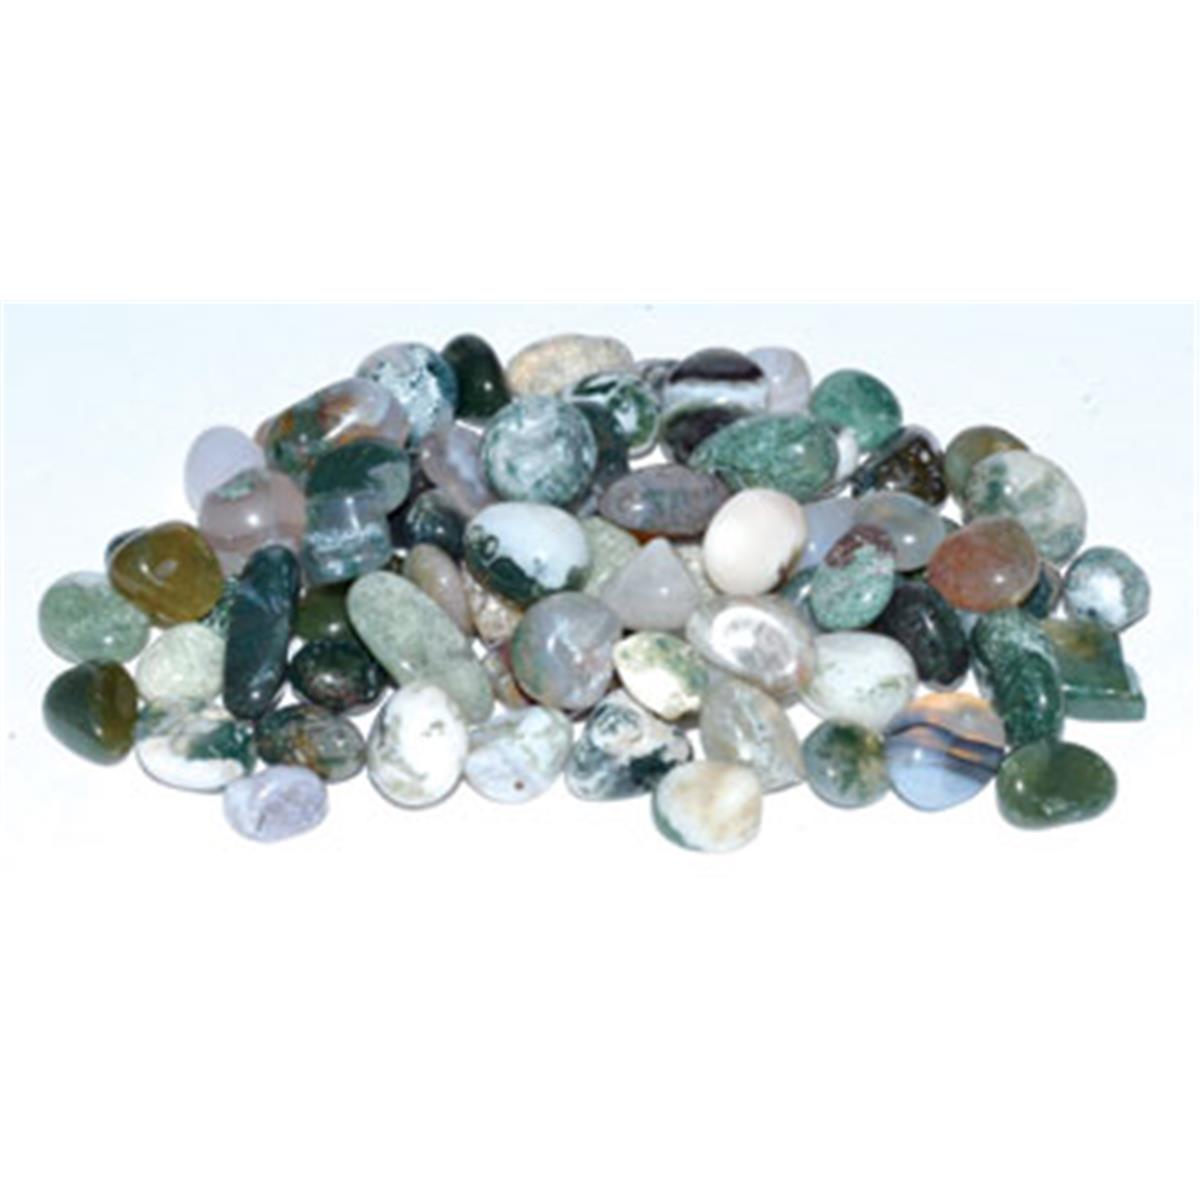 Azure Green Gctagamb 1 Lbs Agate, Moss Tumbled Chips - 7-9 Mm